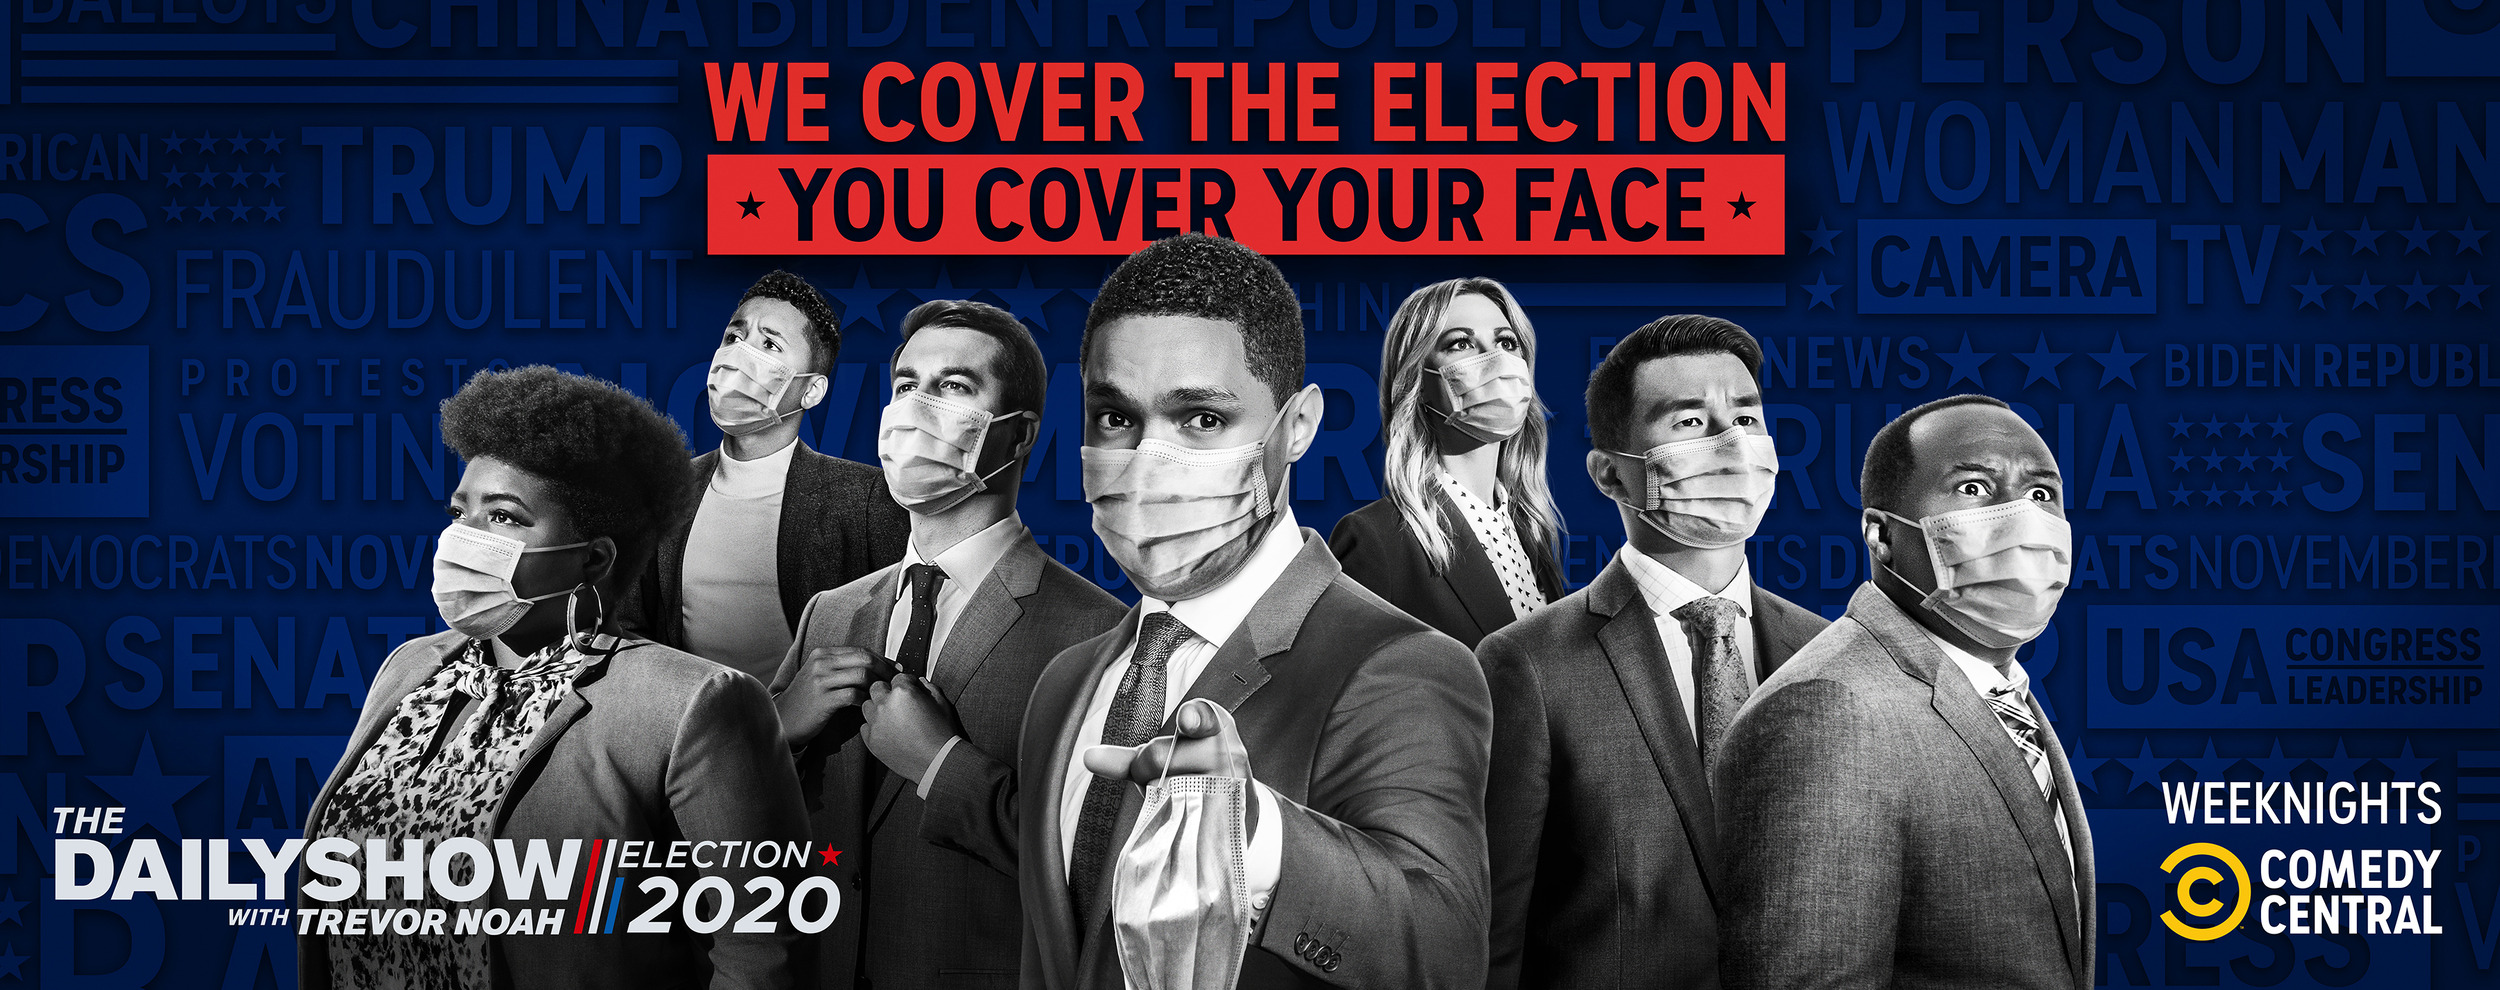 Mega Sized TV Poster Image for The Daily Show (#2 of 2)